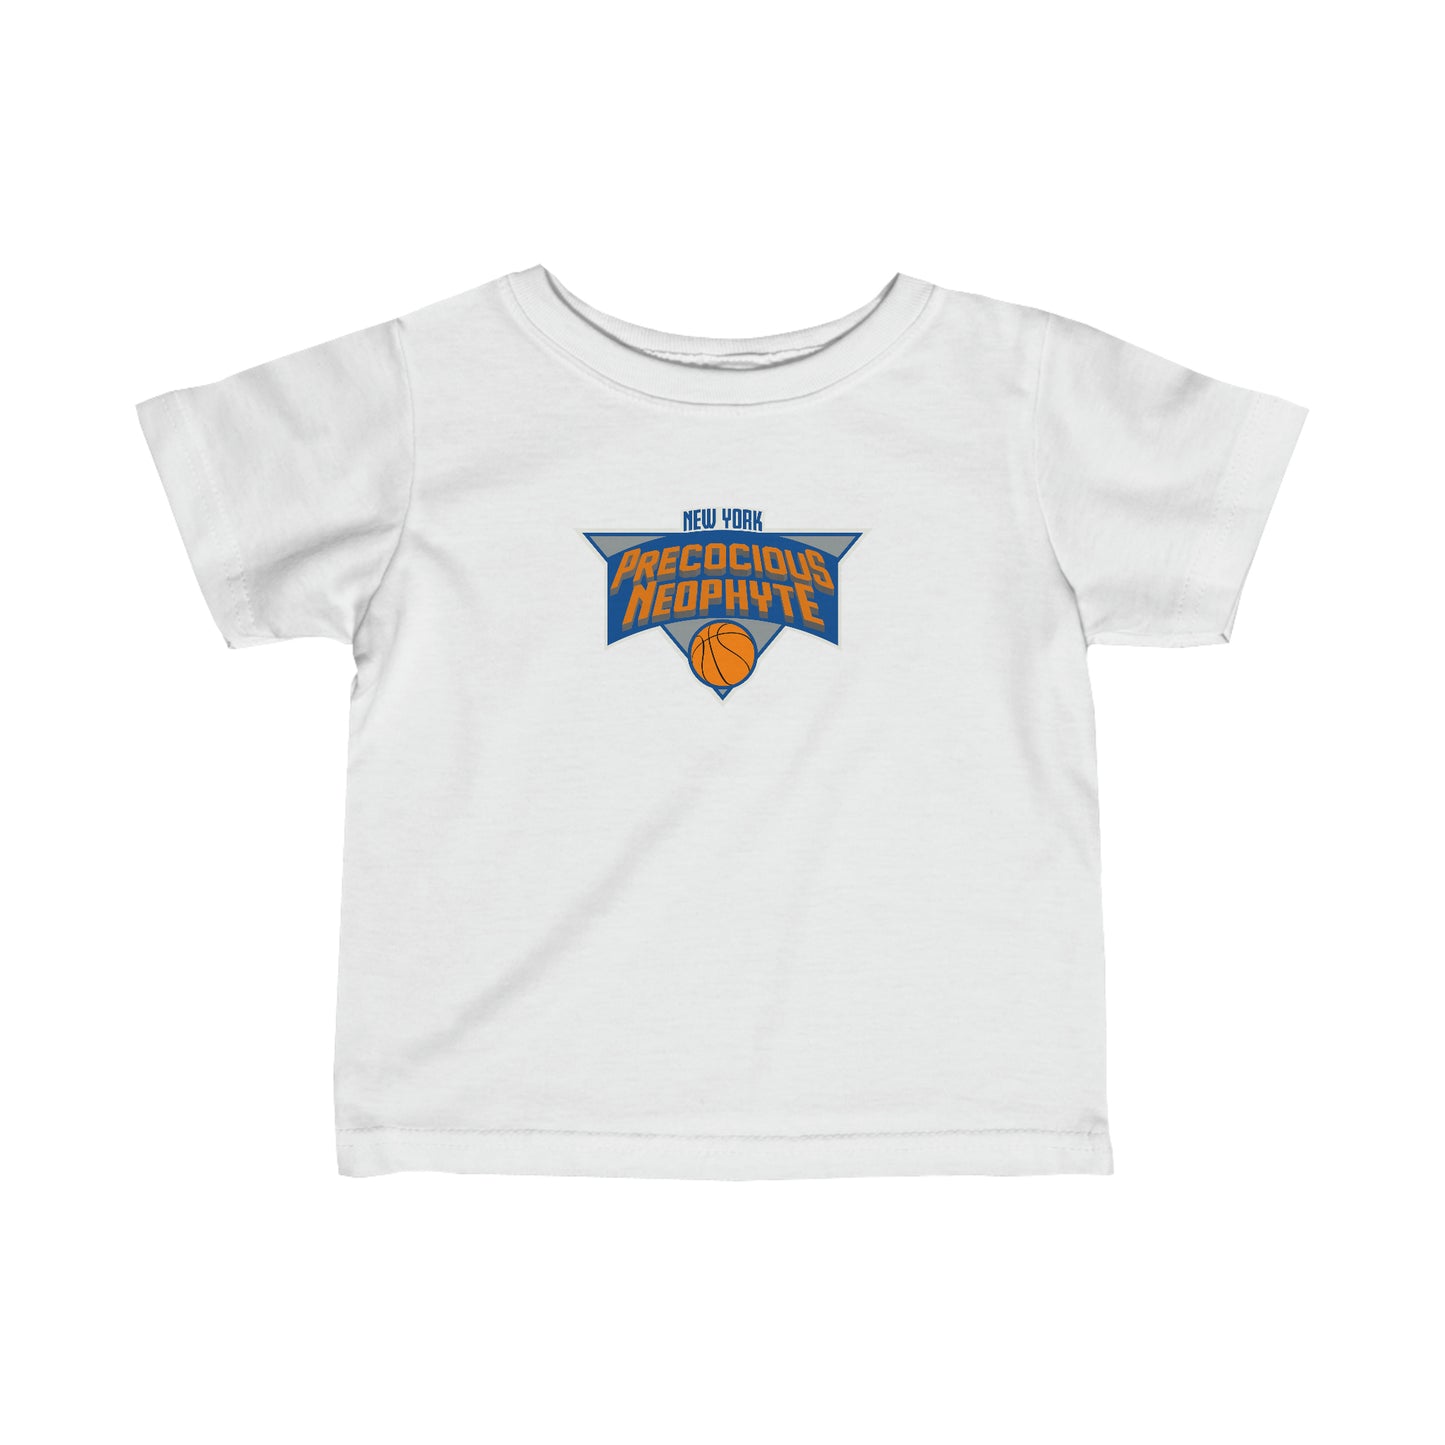 Precocious Neophyte - Baby T-Shirt